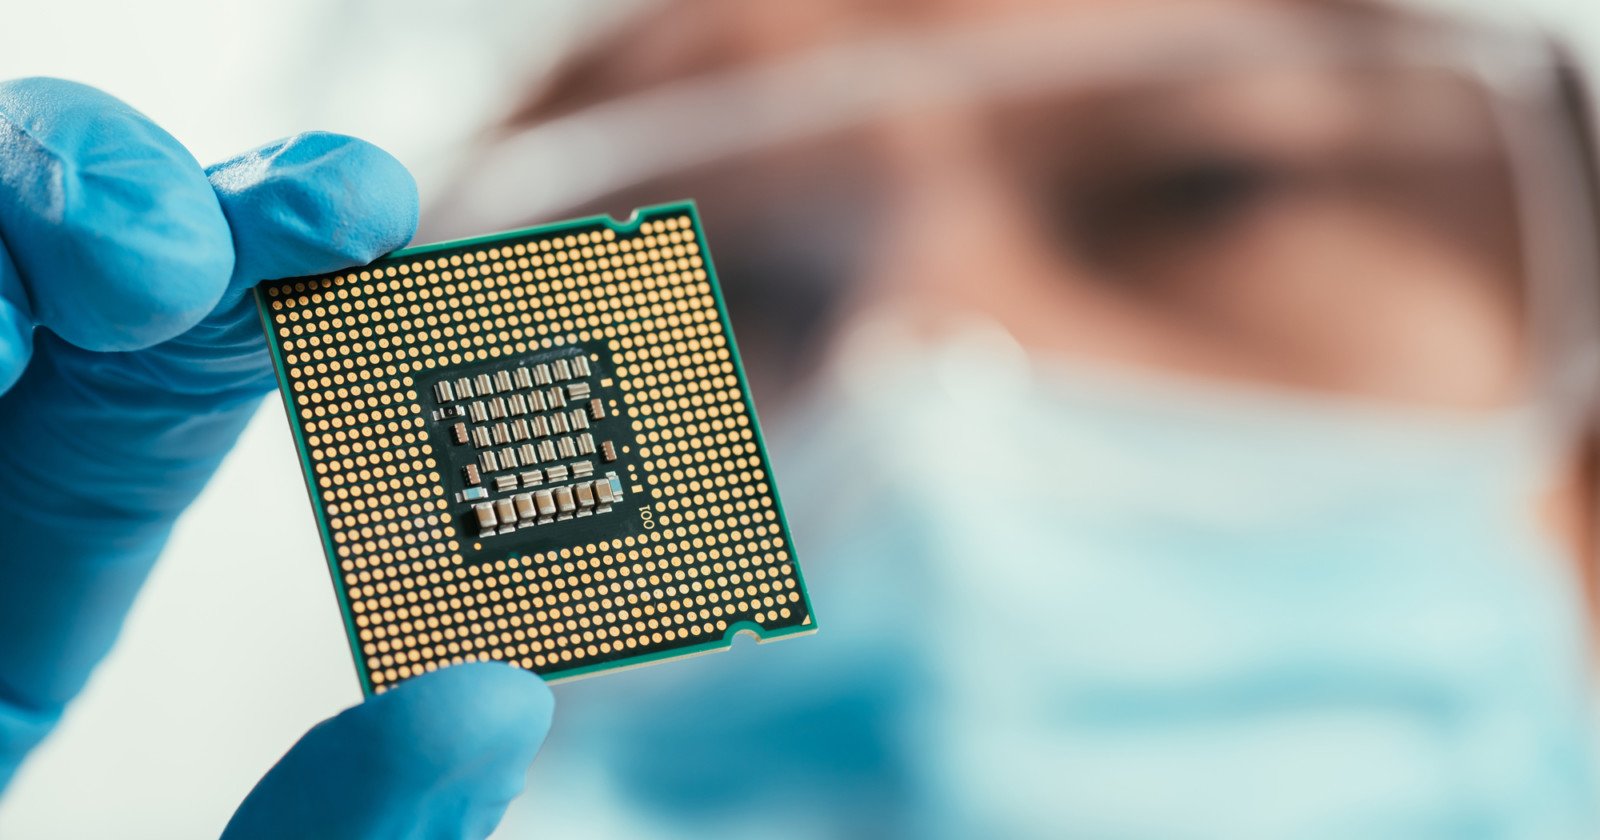  chip can process nearly two billion per 